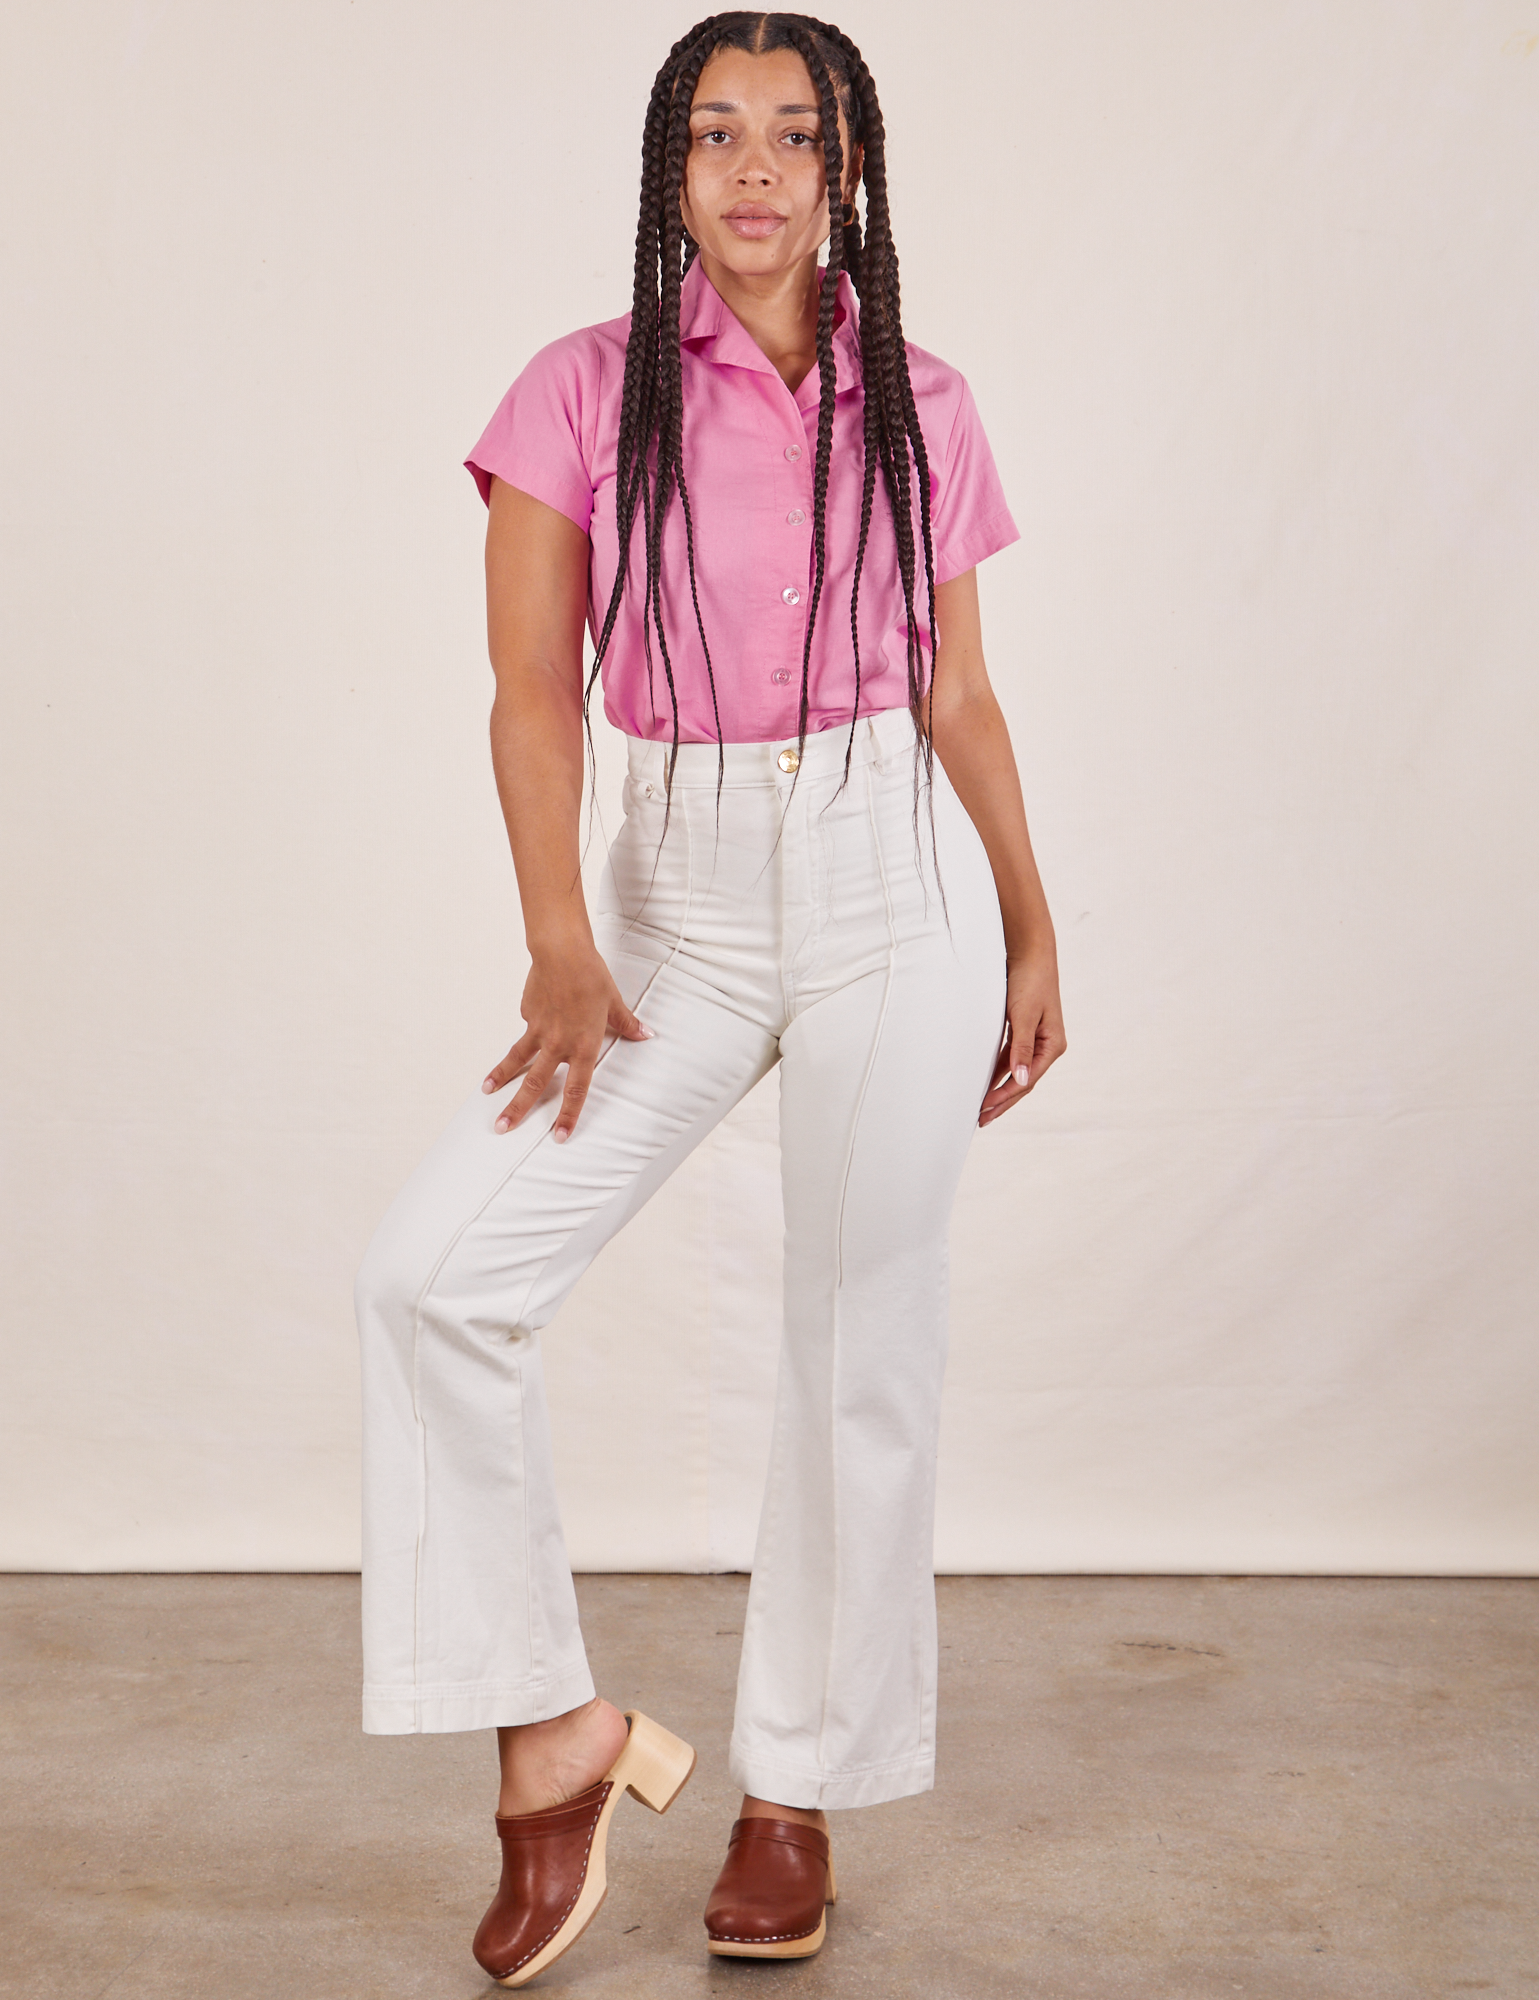 Gabi is wearing Pantry Button-Up in Bubblegum Pink and vintage Tee off-white Western Pants